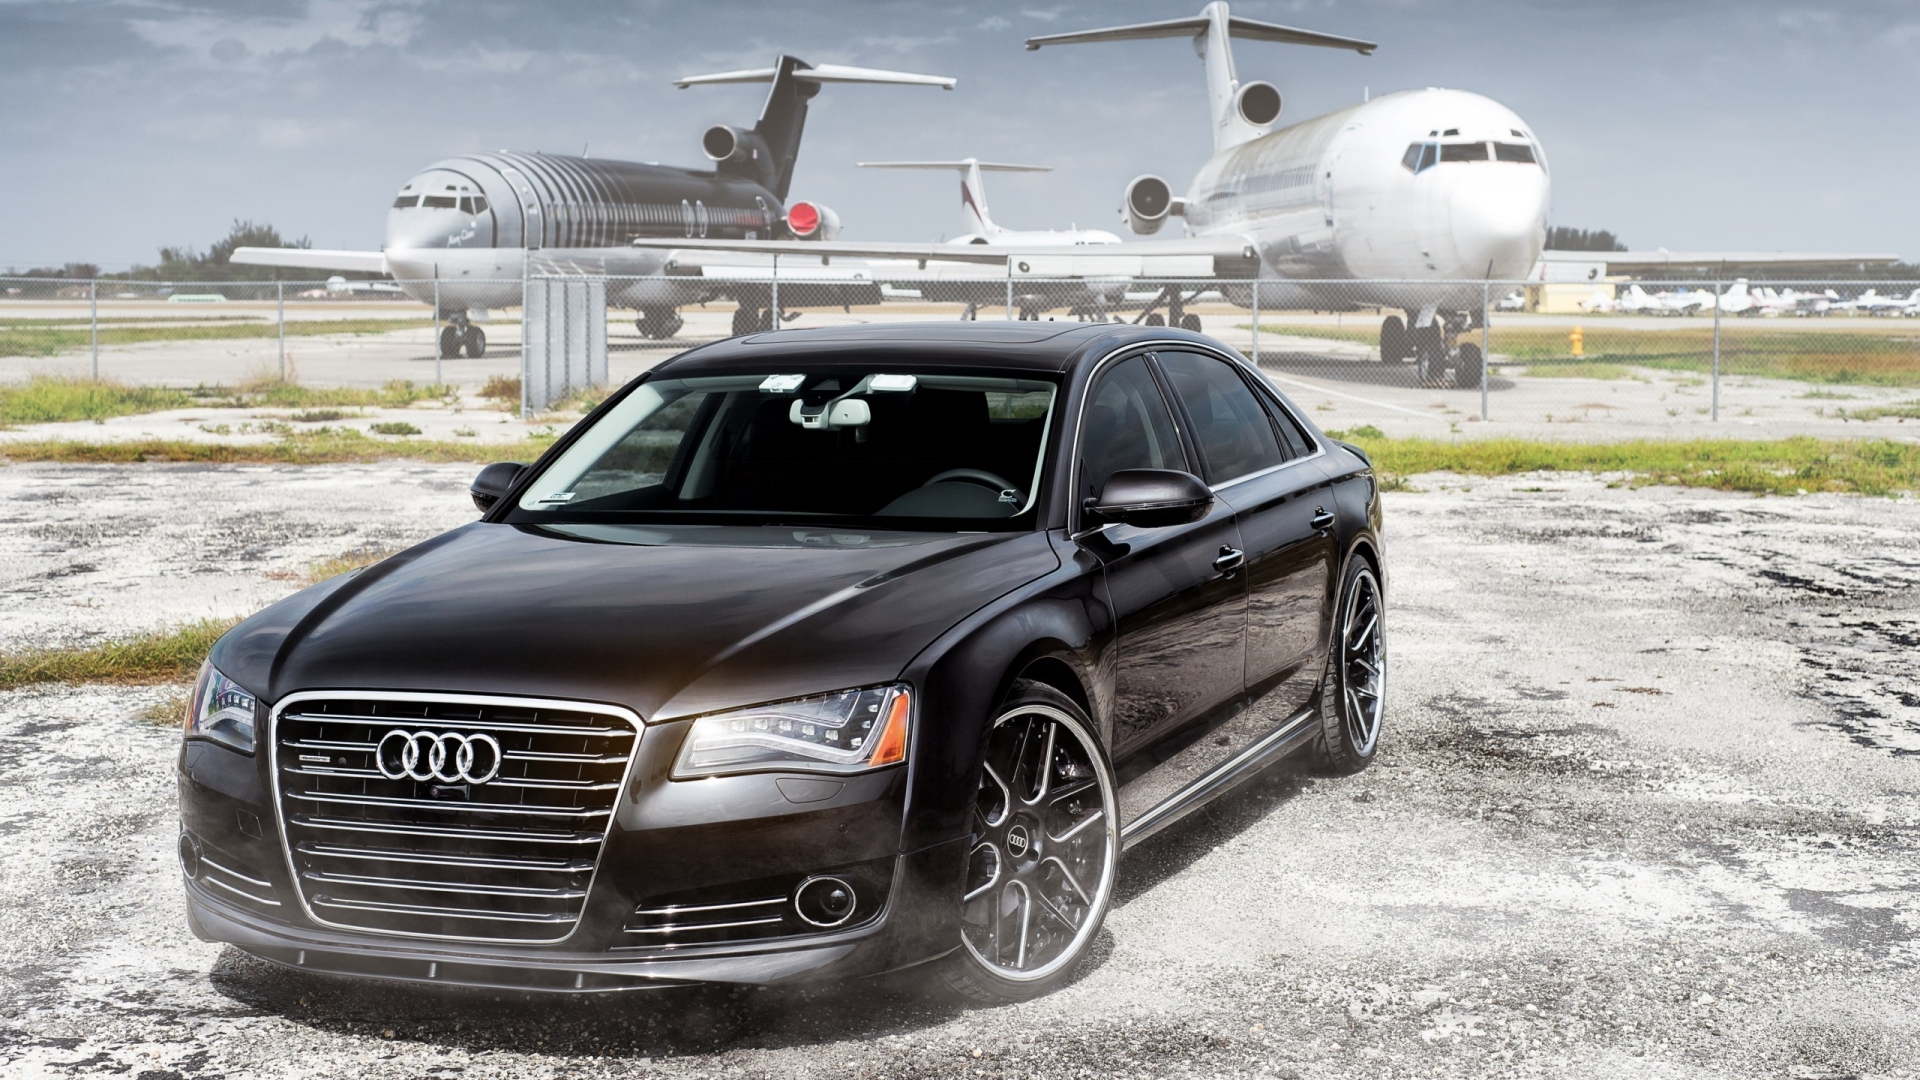 Stunning Audi A8 for 1920 x 1080 HDTV 1080p resolution